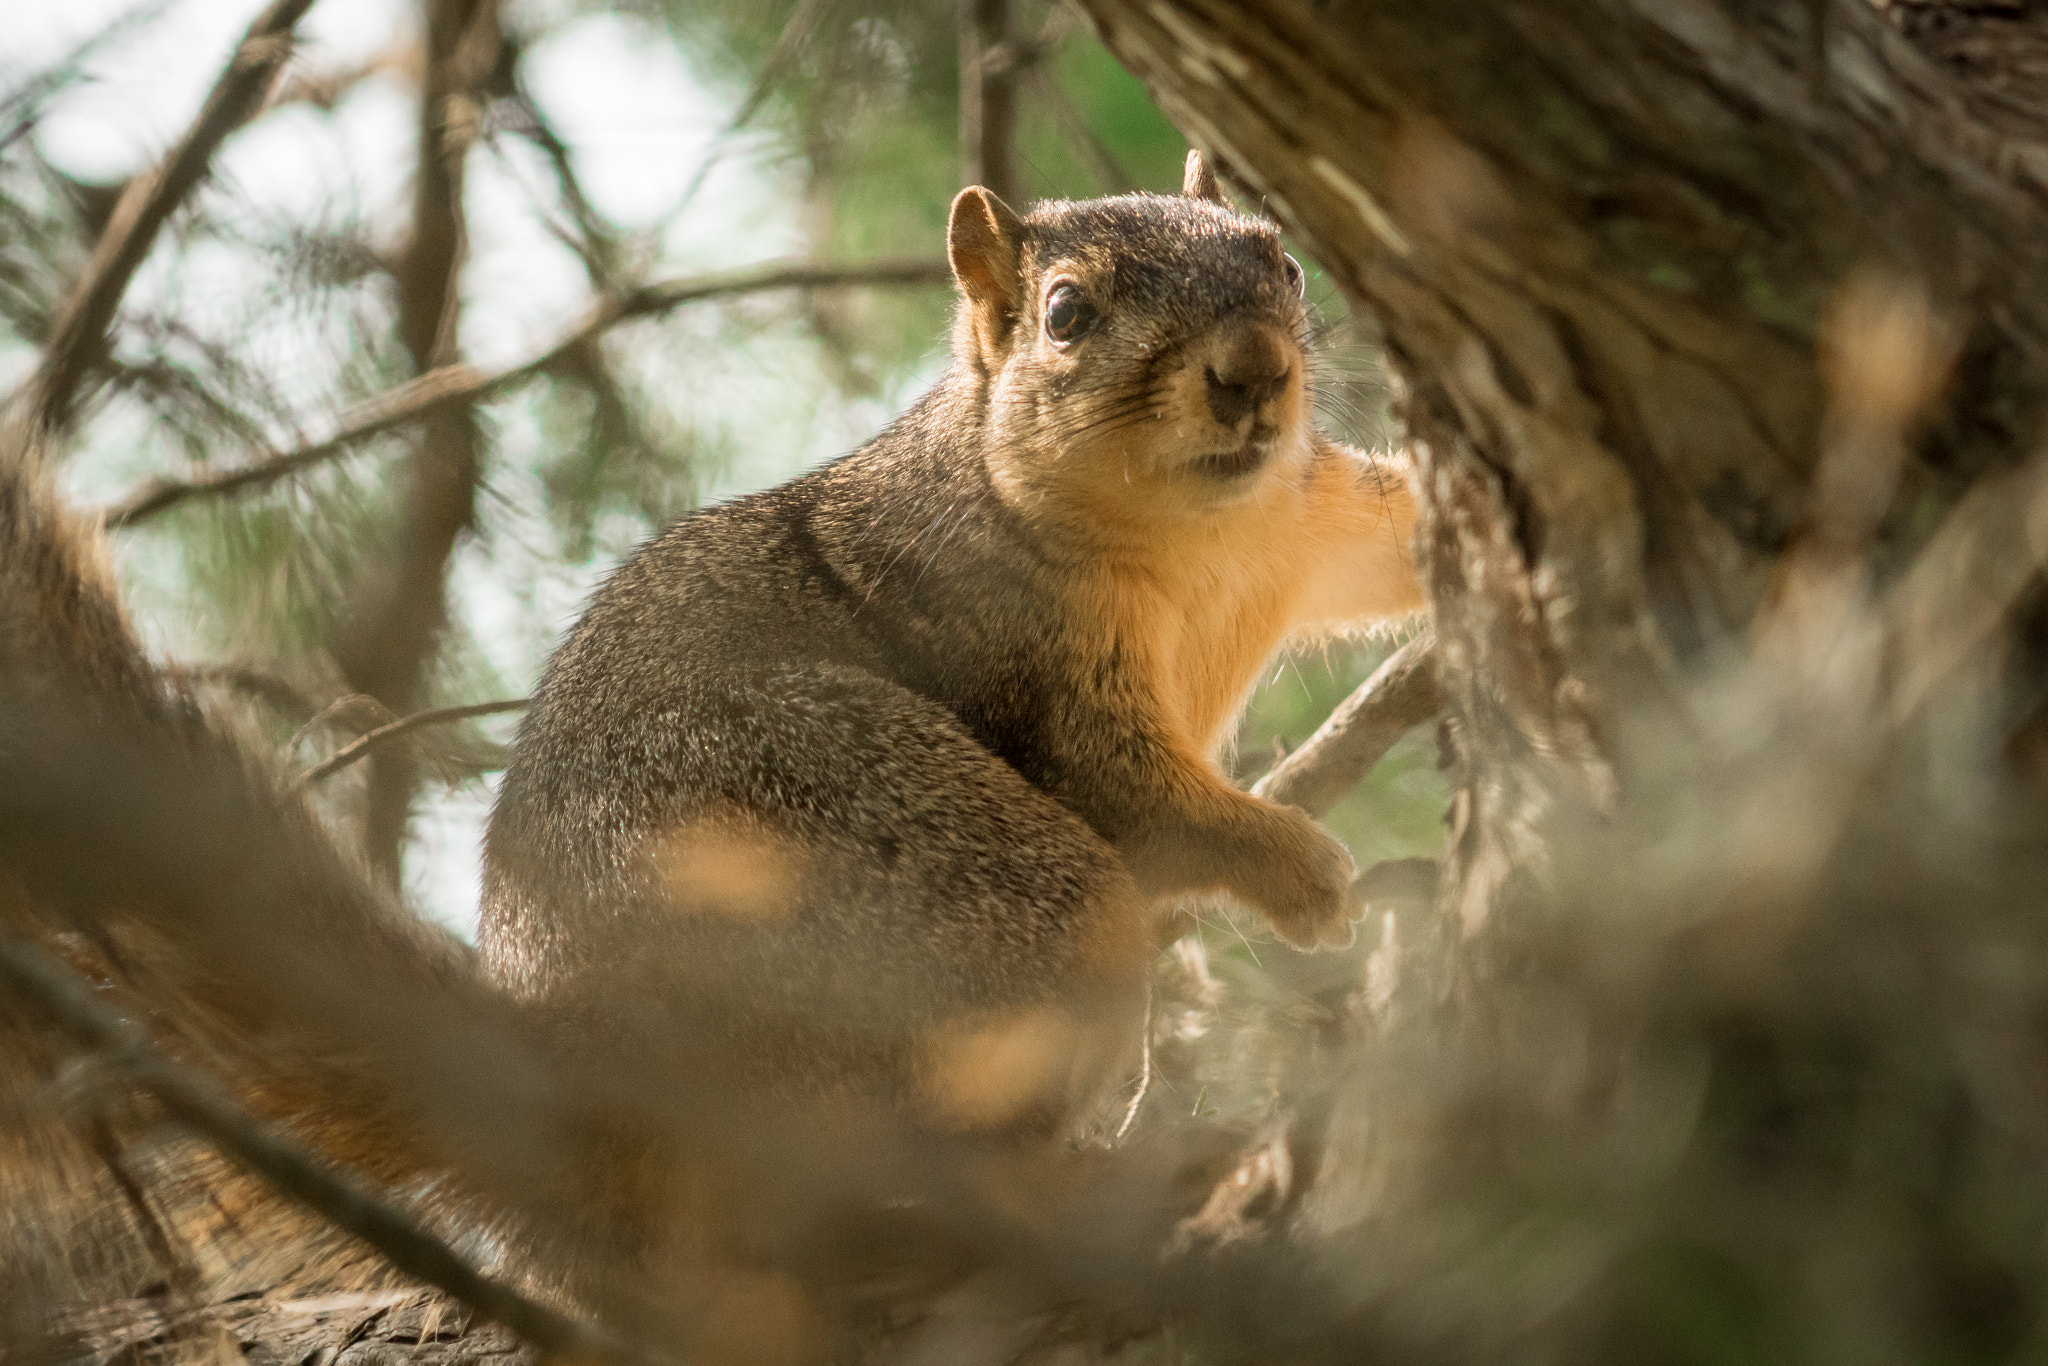 Sony a6300 sample photo. Fat squirrel in a tree photography